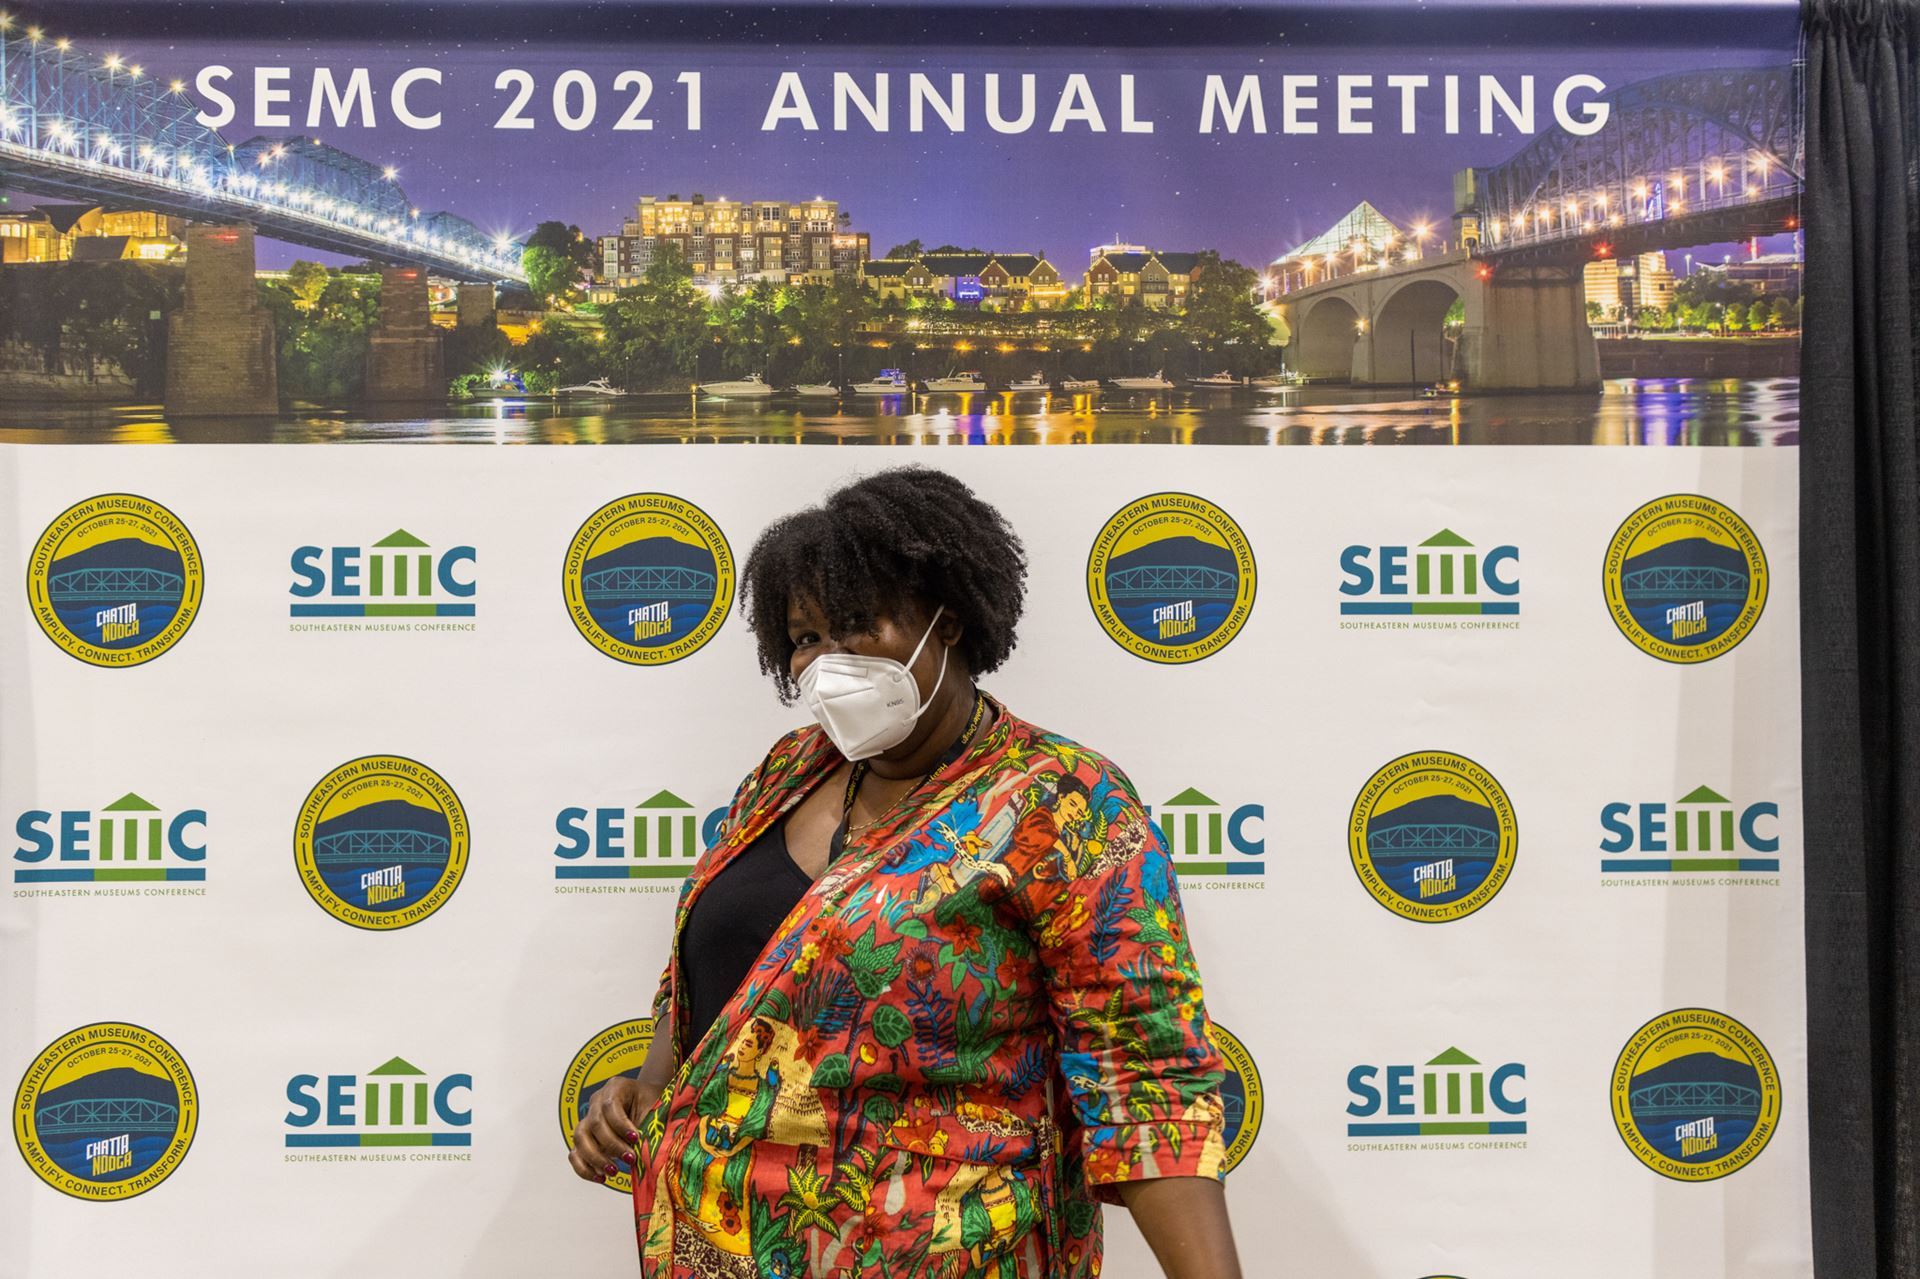 Medium shot of black female with curly brown hair, wearing a mask and multicolored blazer at the SEMC 2021 Annual Meeting